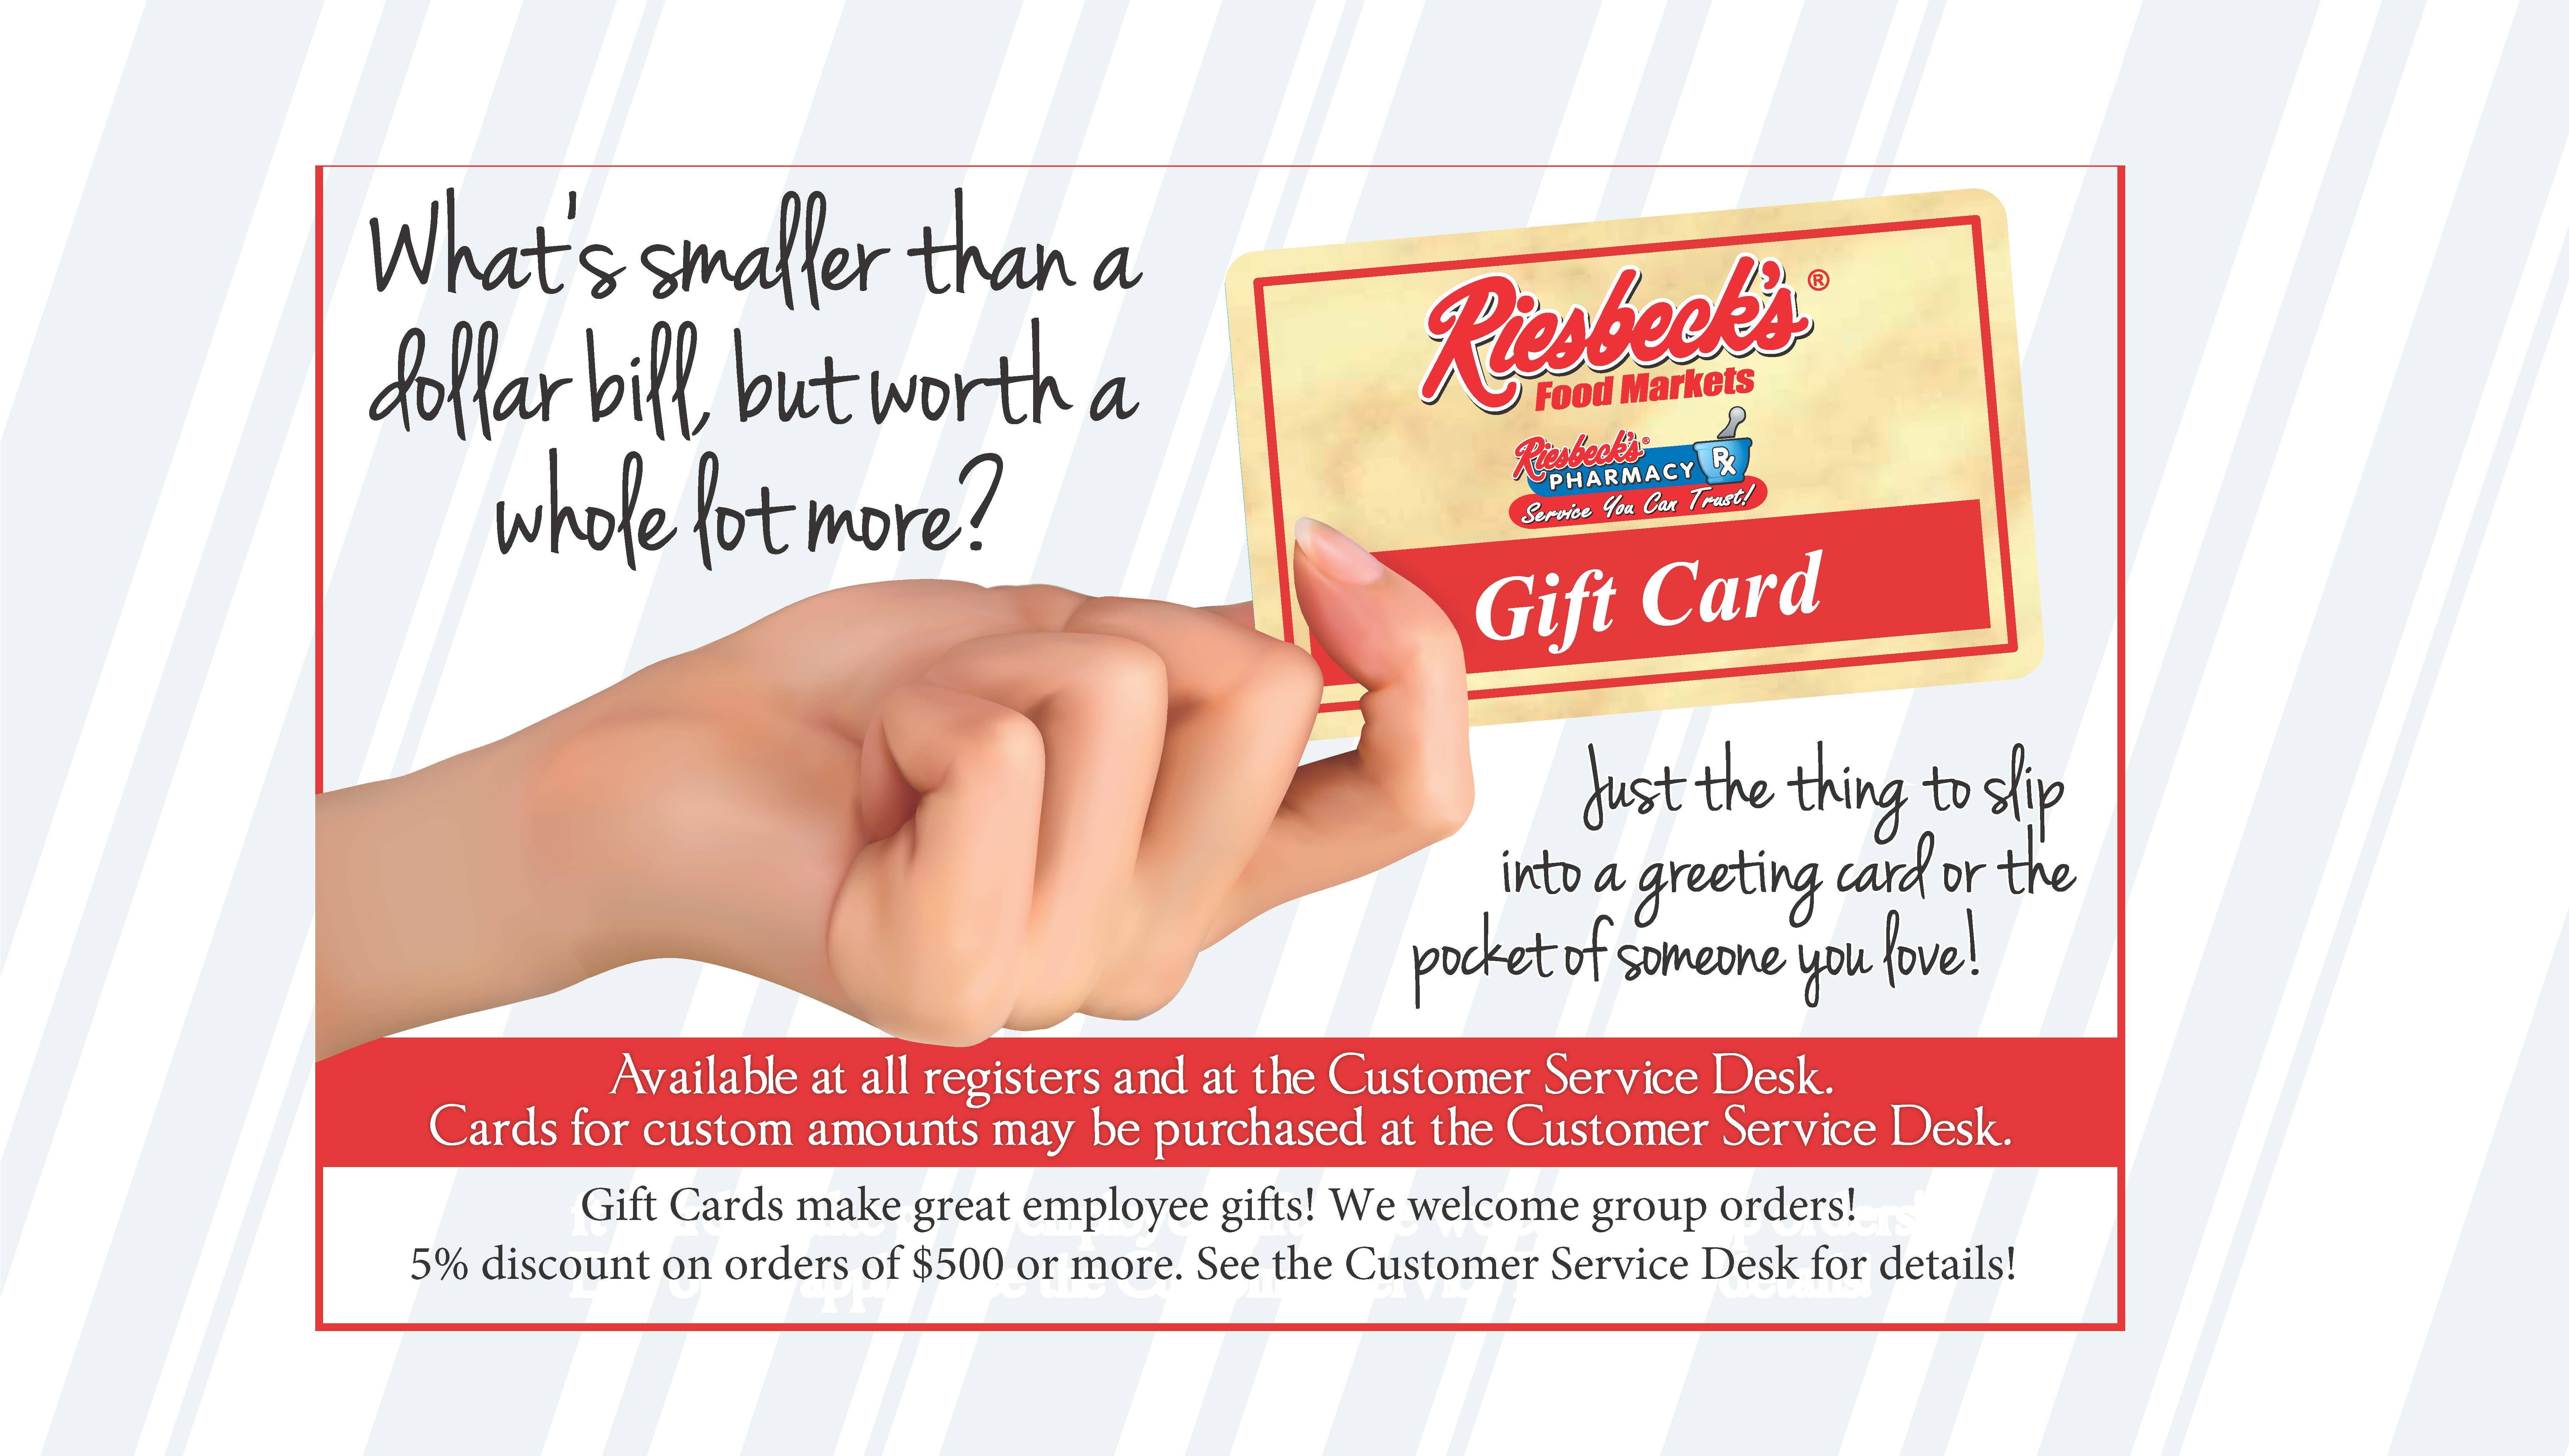 Riesbeck's Gift Cards Available